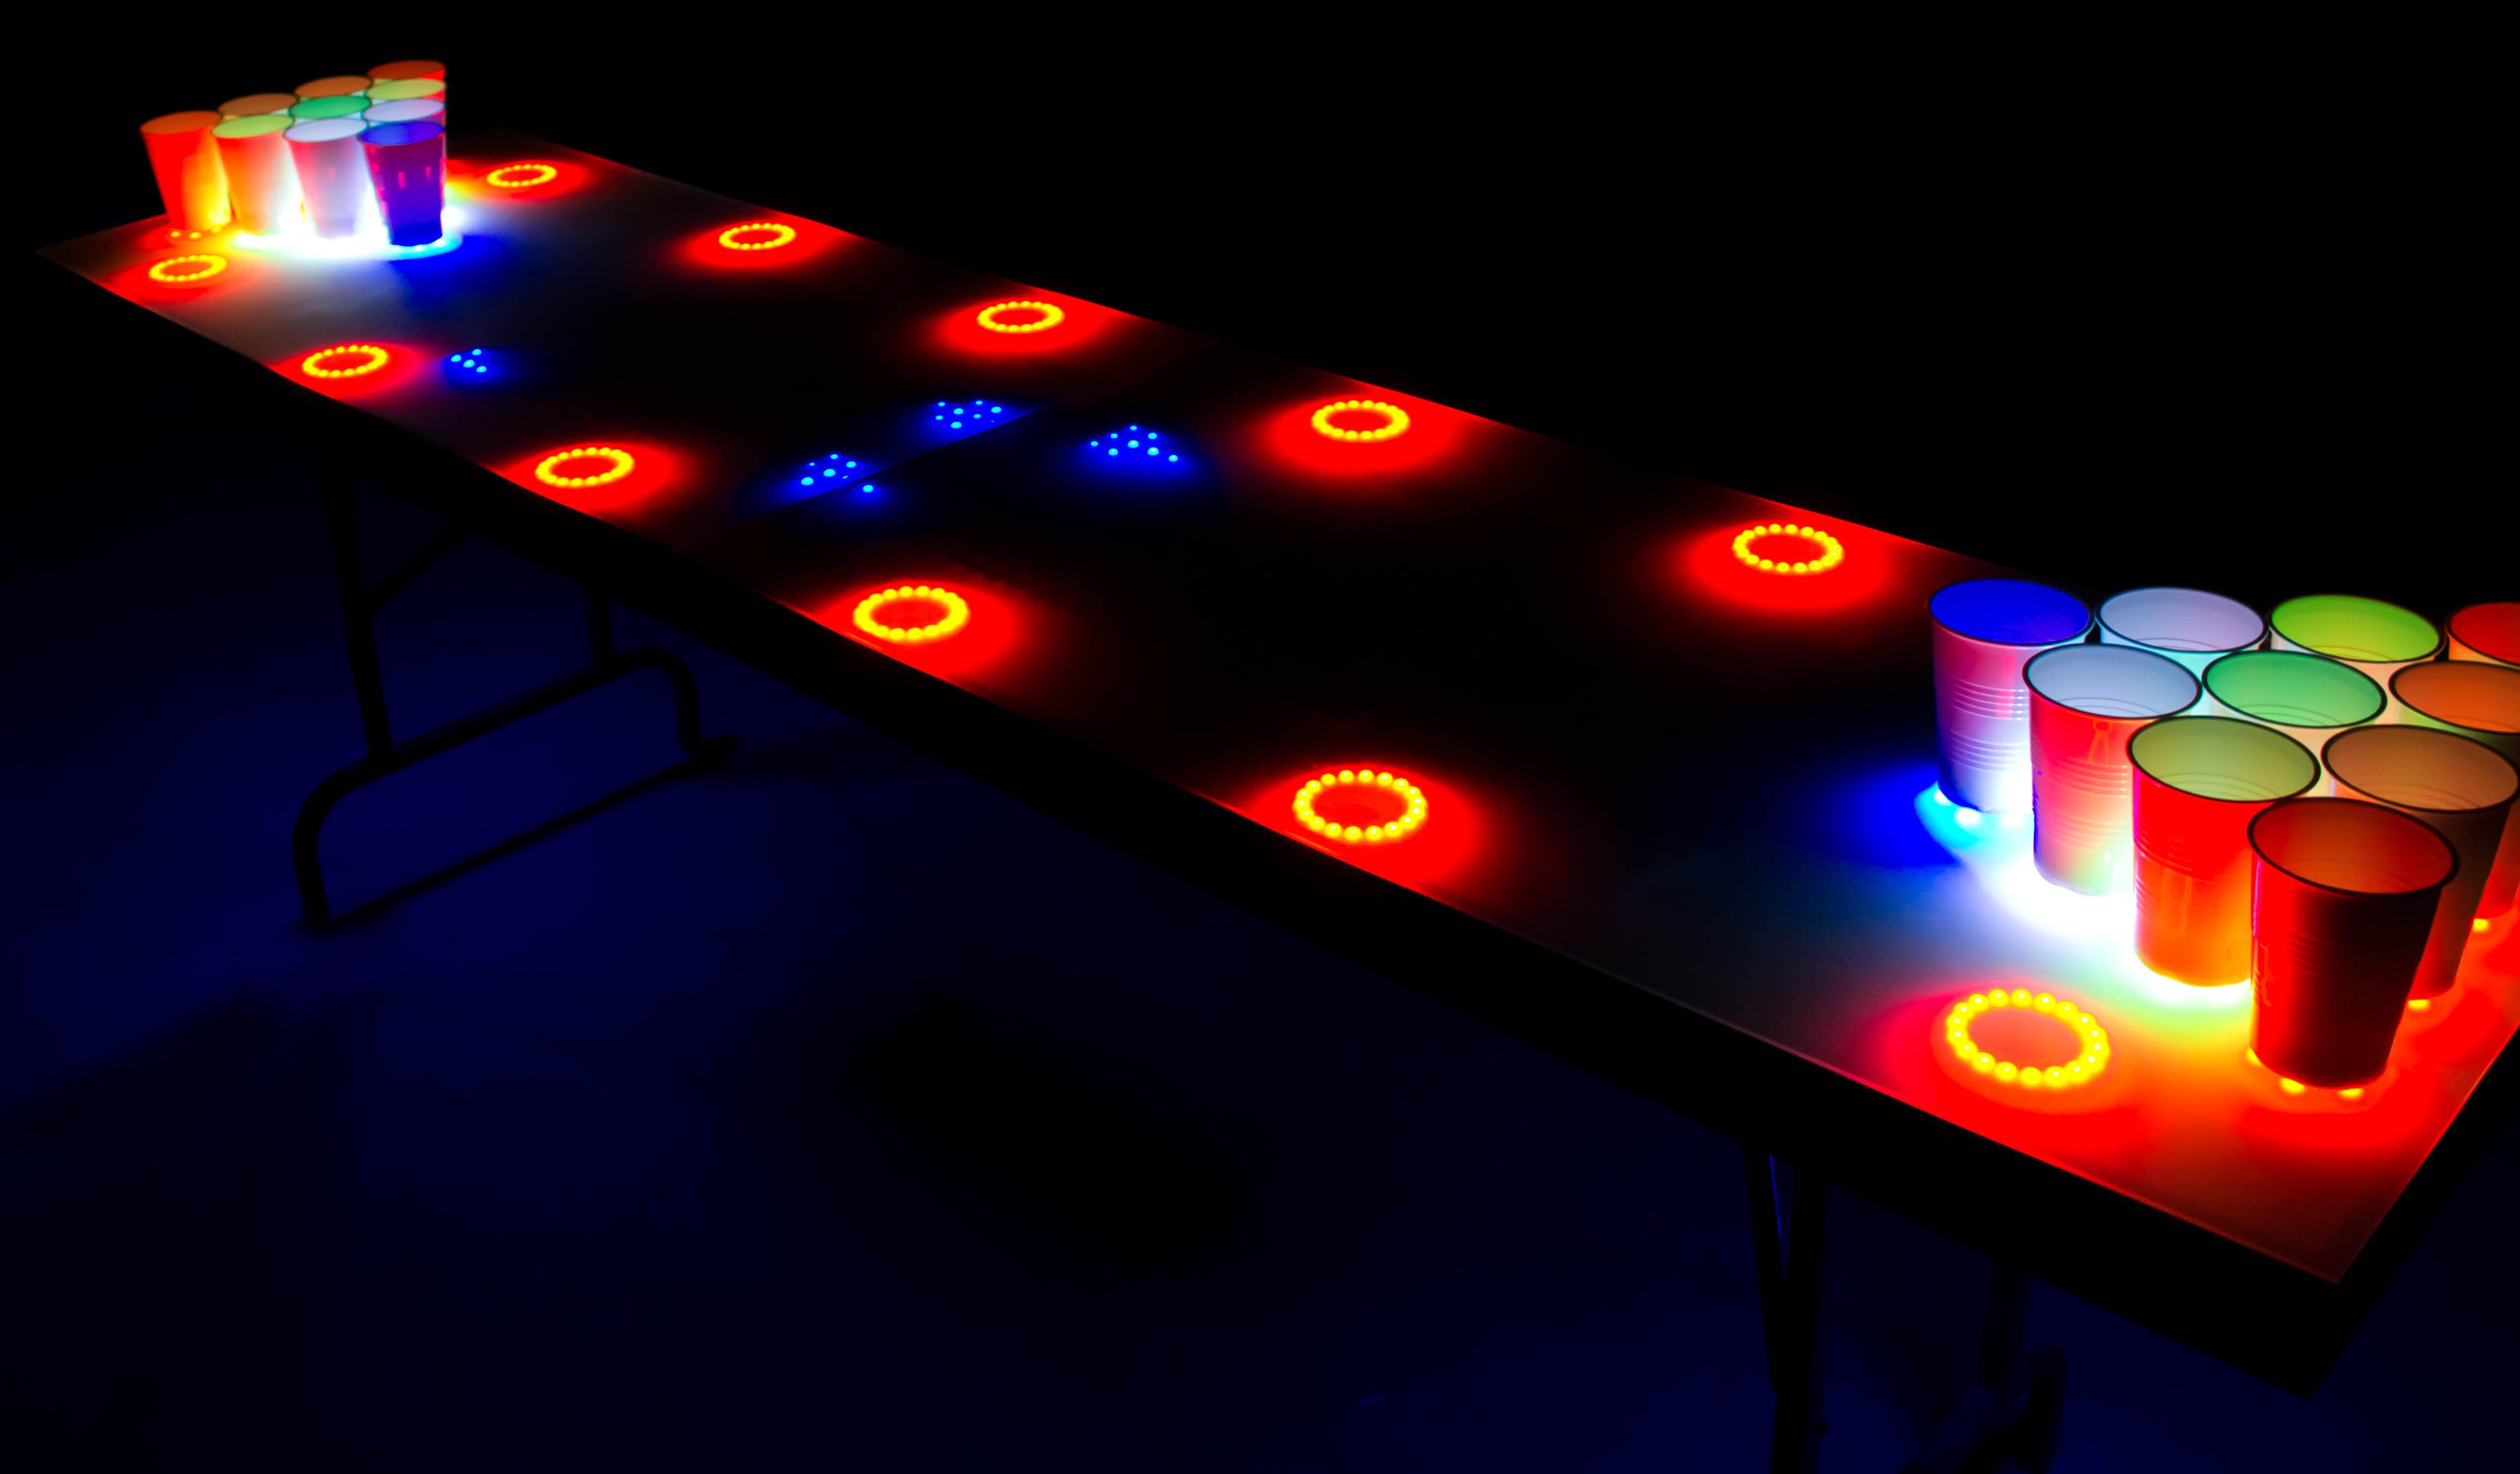 Pest Lavet af Peer RaveTable Interactive LED Beer Pong Table | Chexal